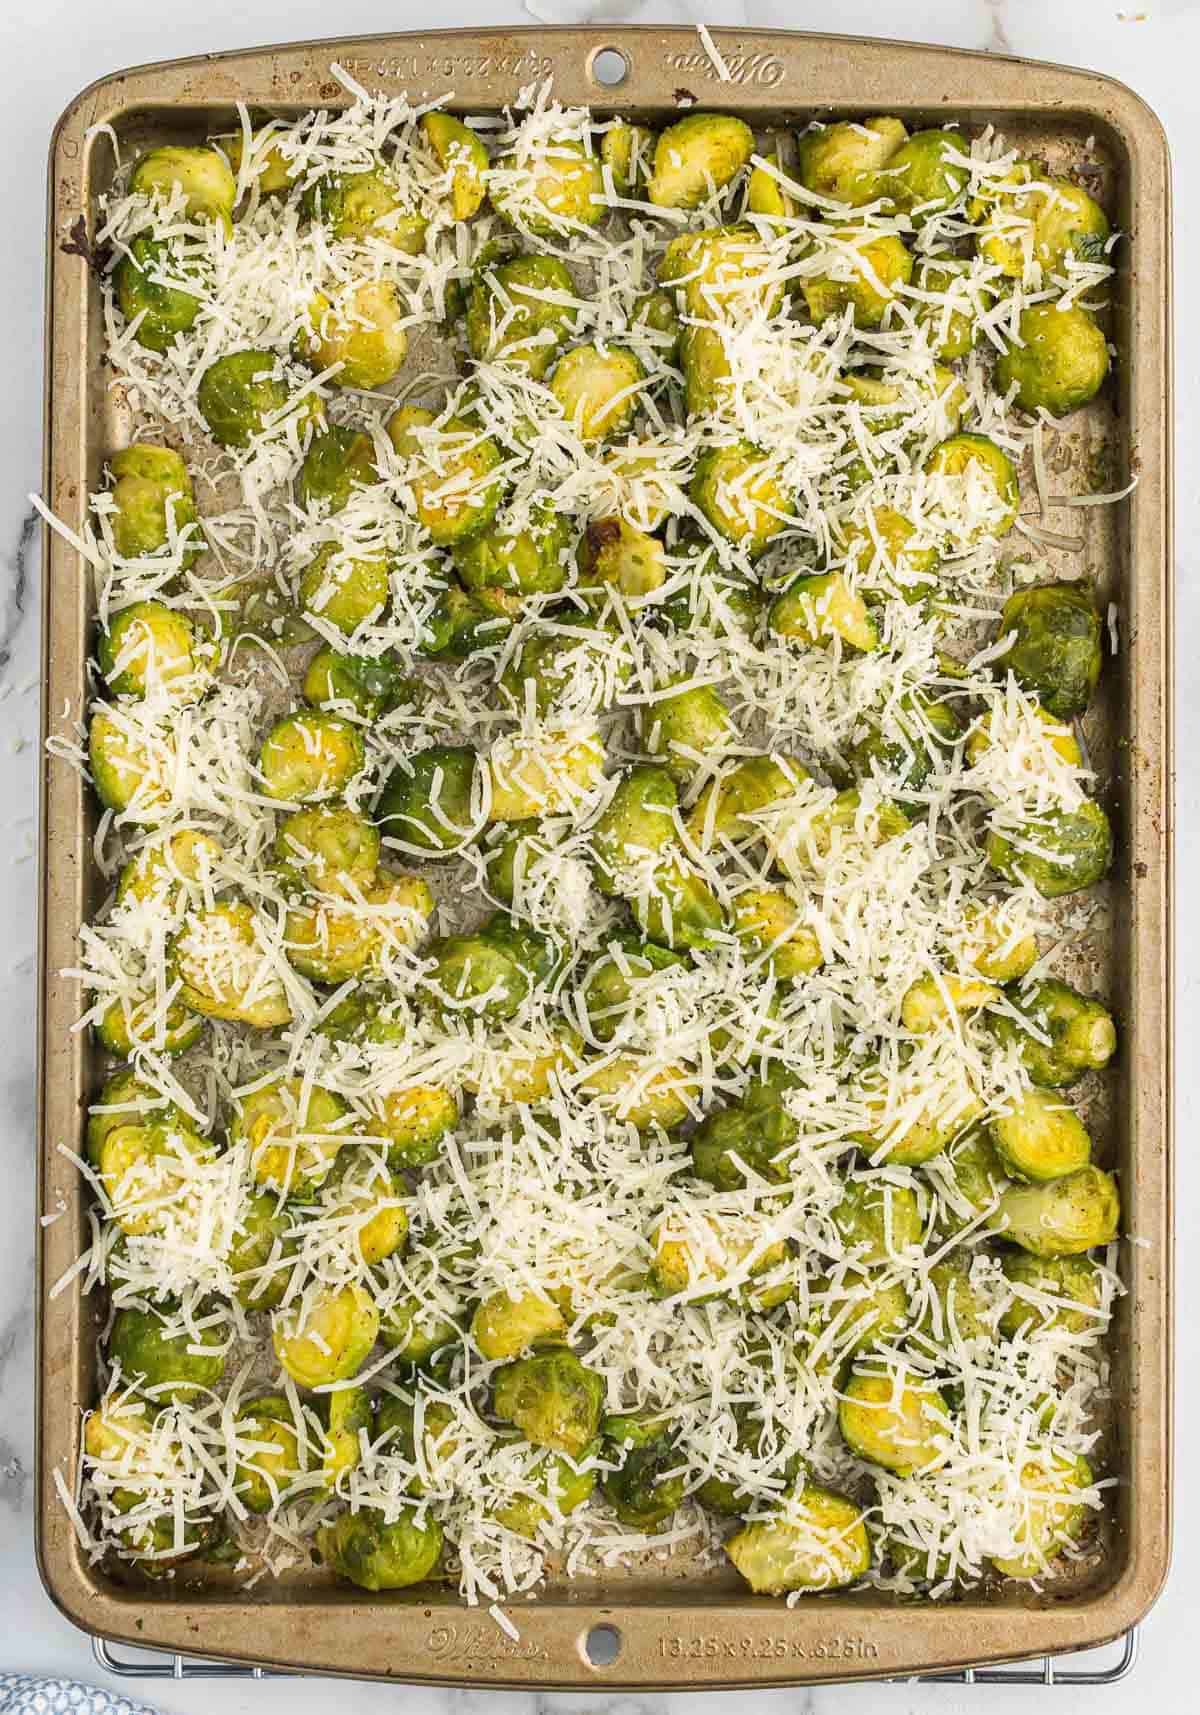 brussel sprouts topped with parmesan cheese